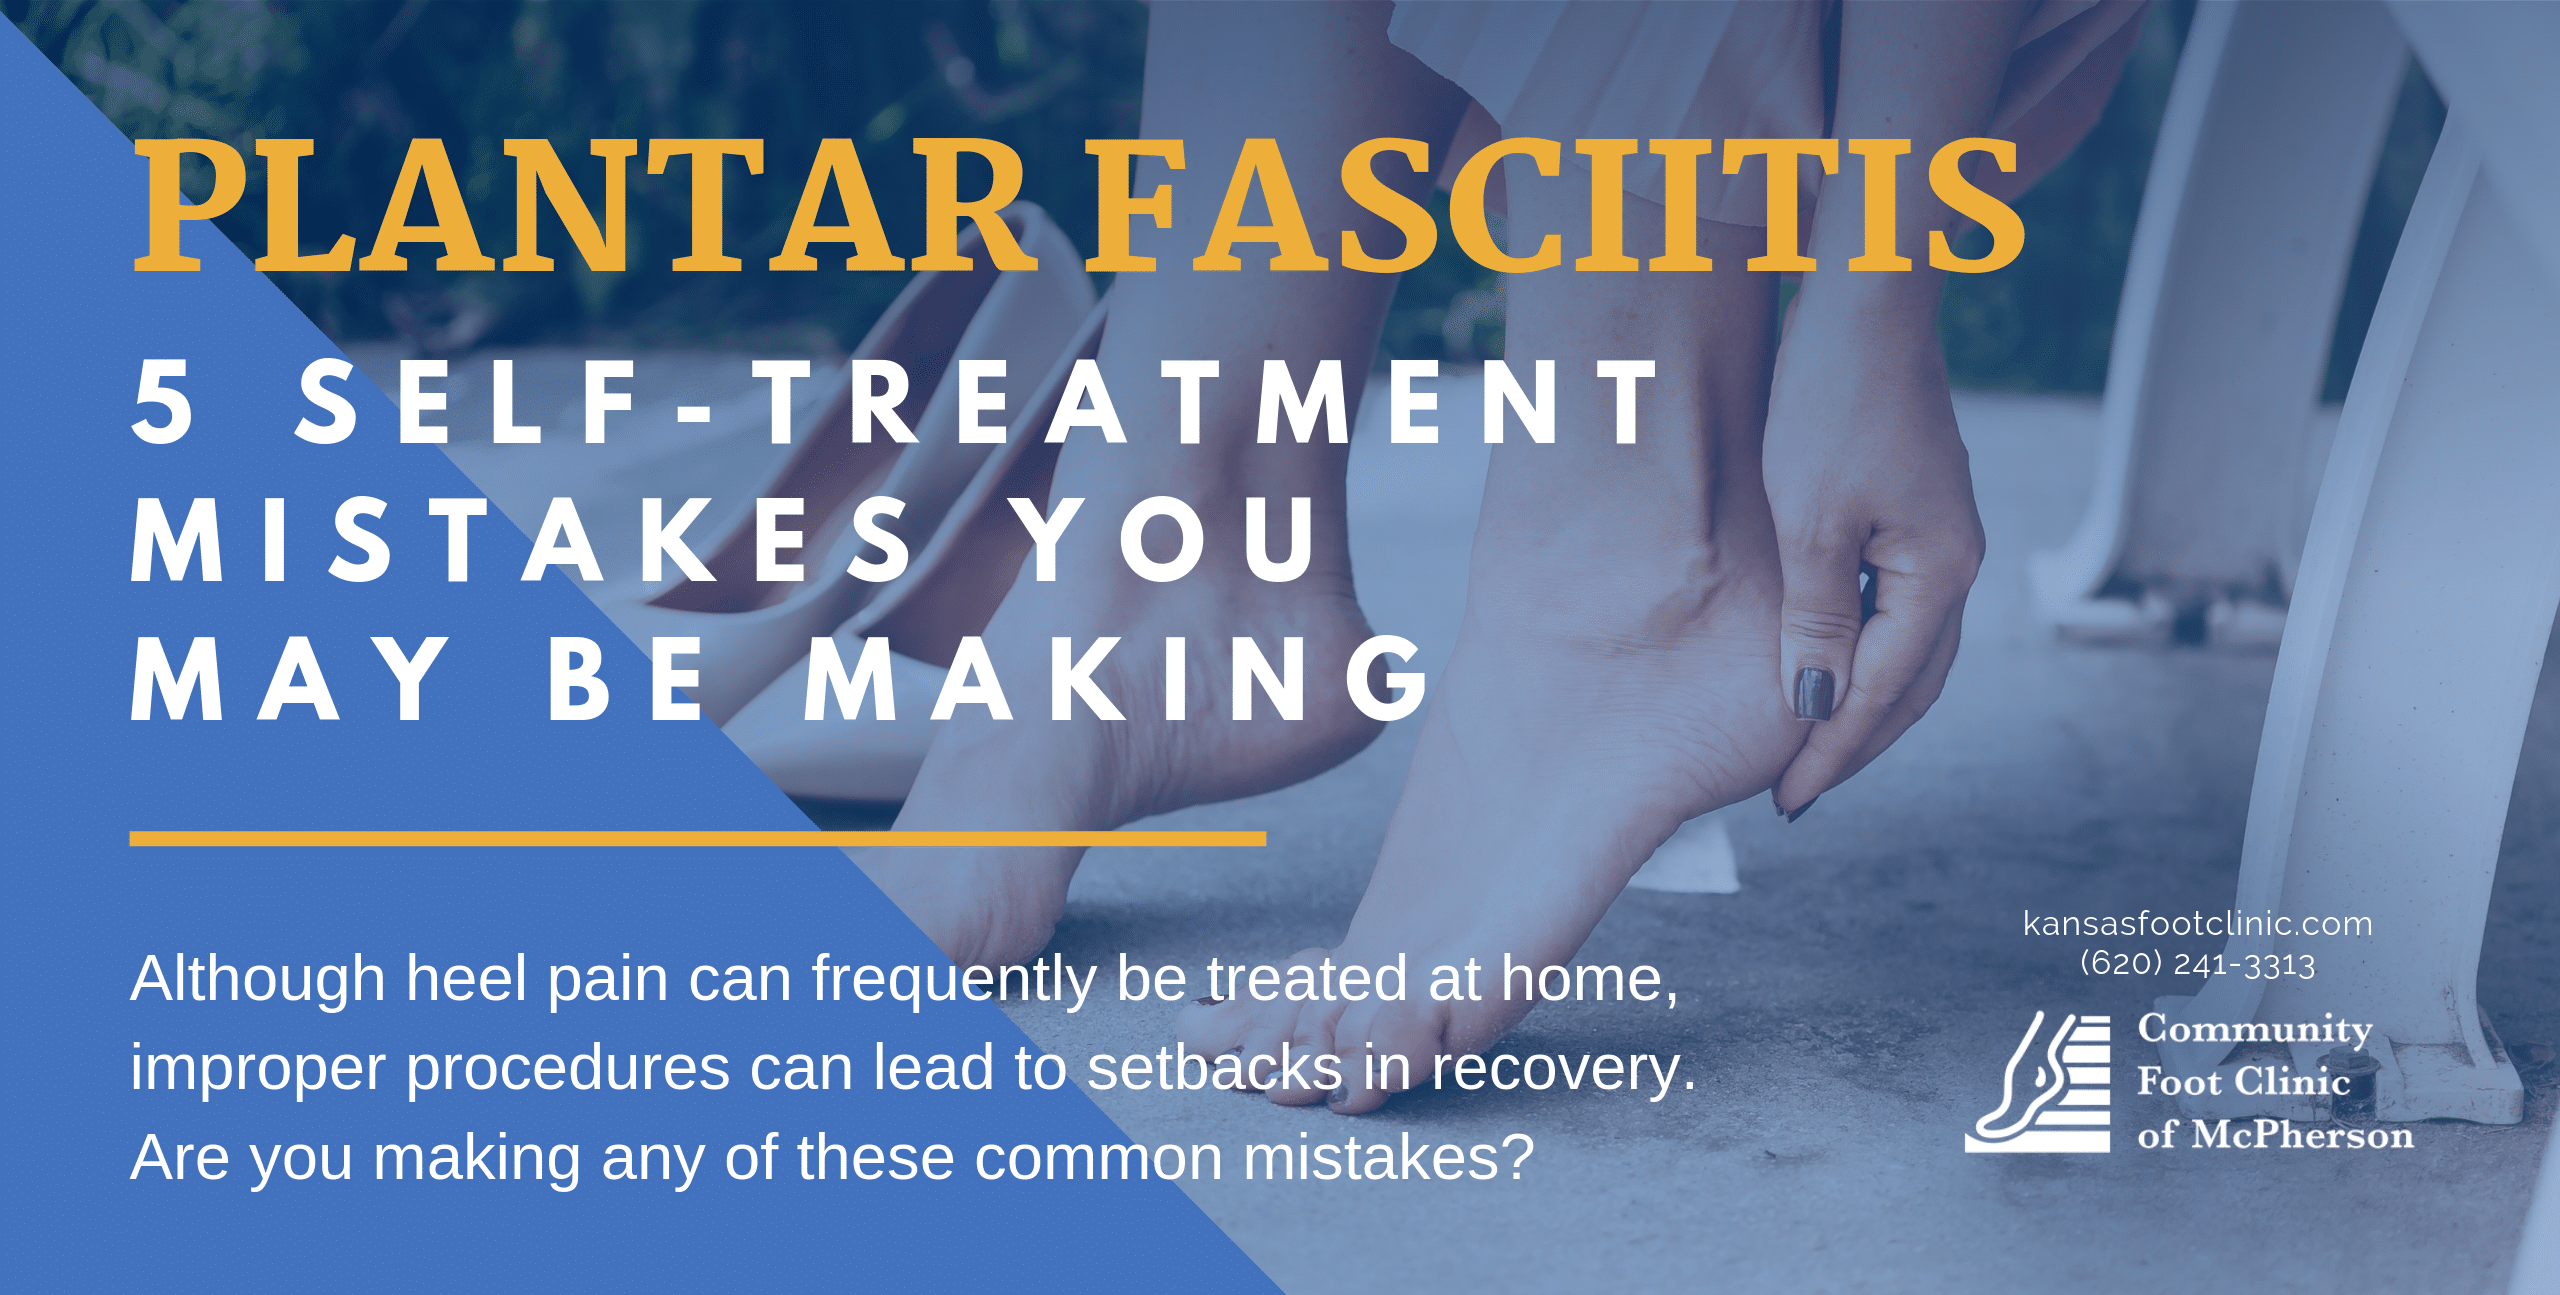 5 Self-Treatment Mistakes You May Be Making - Plantar Fasciitis